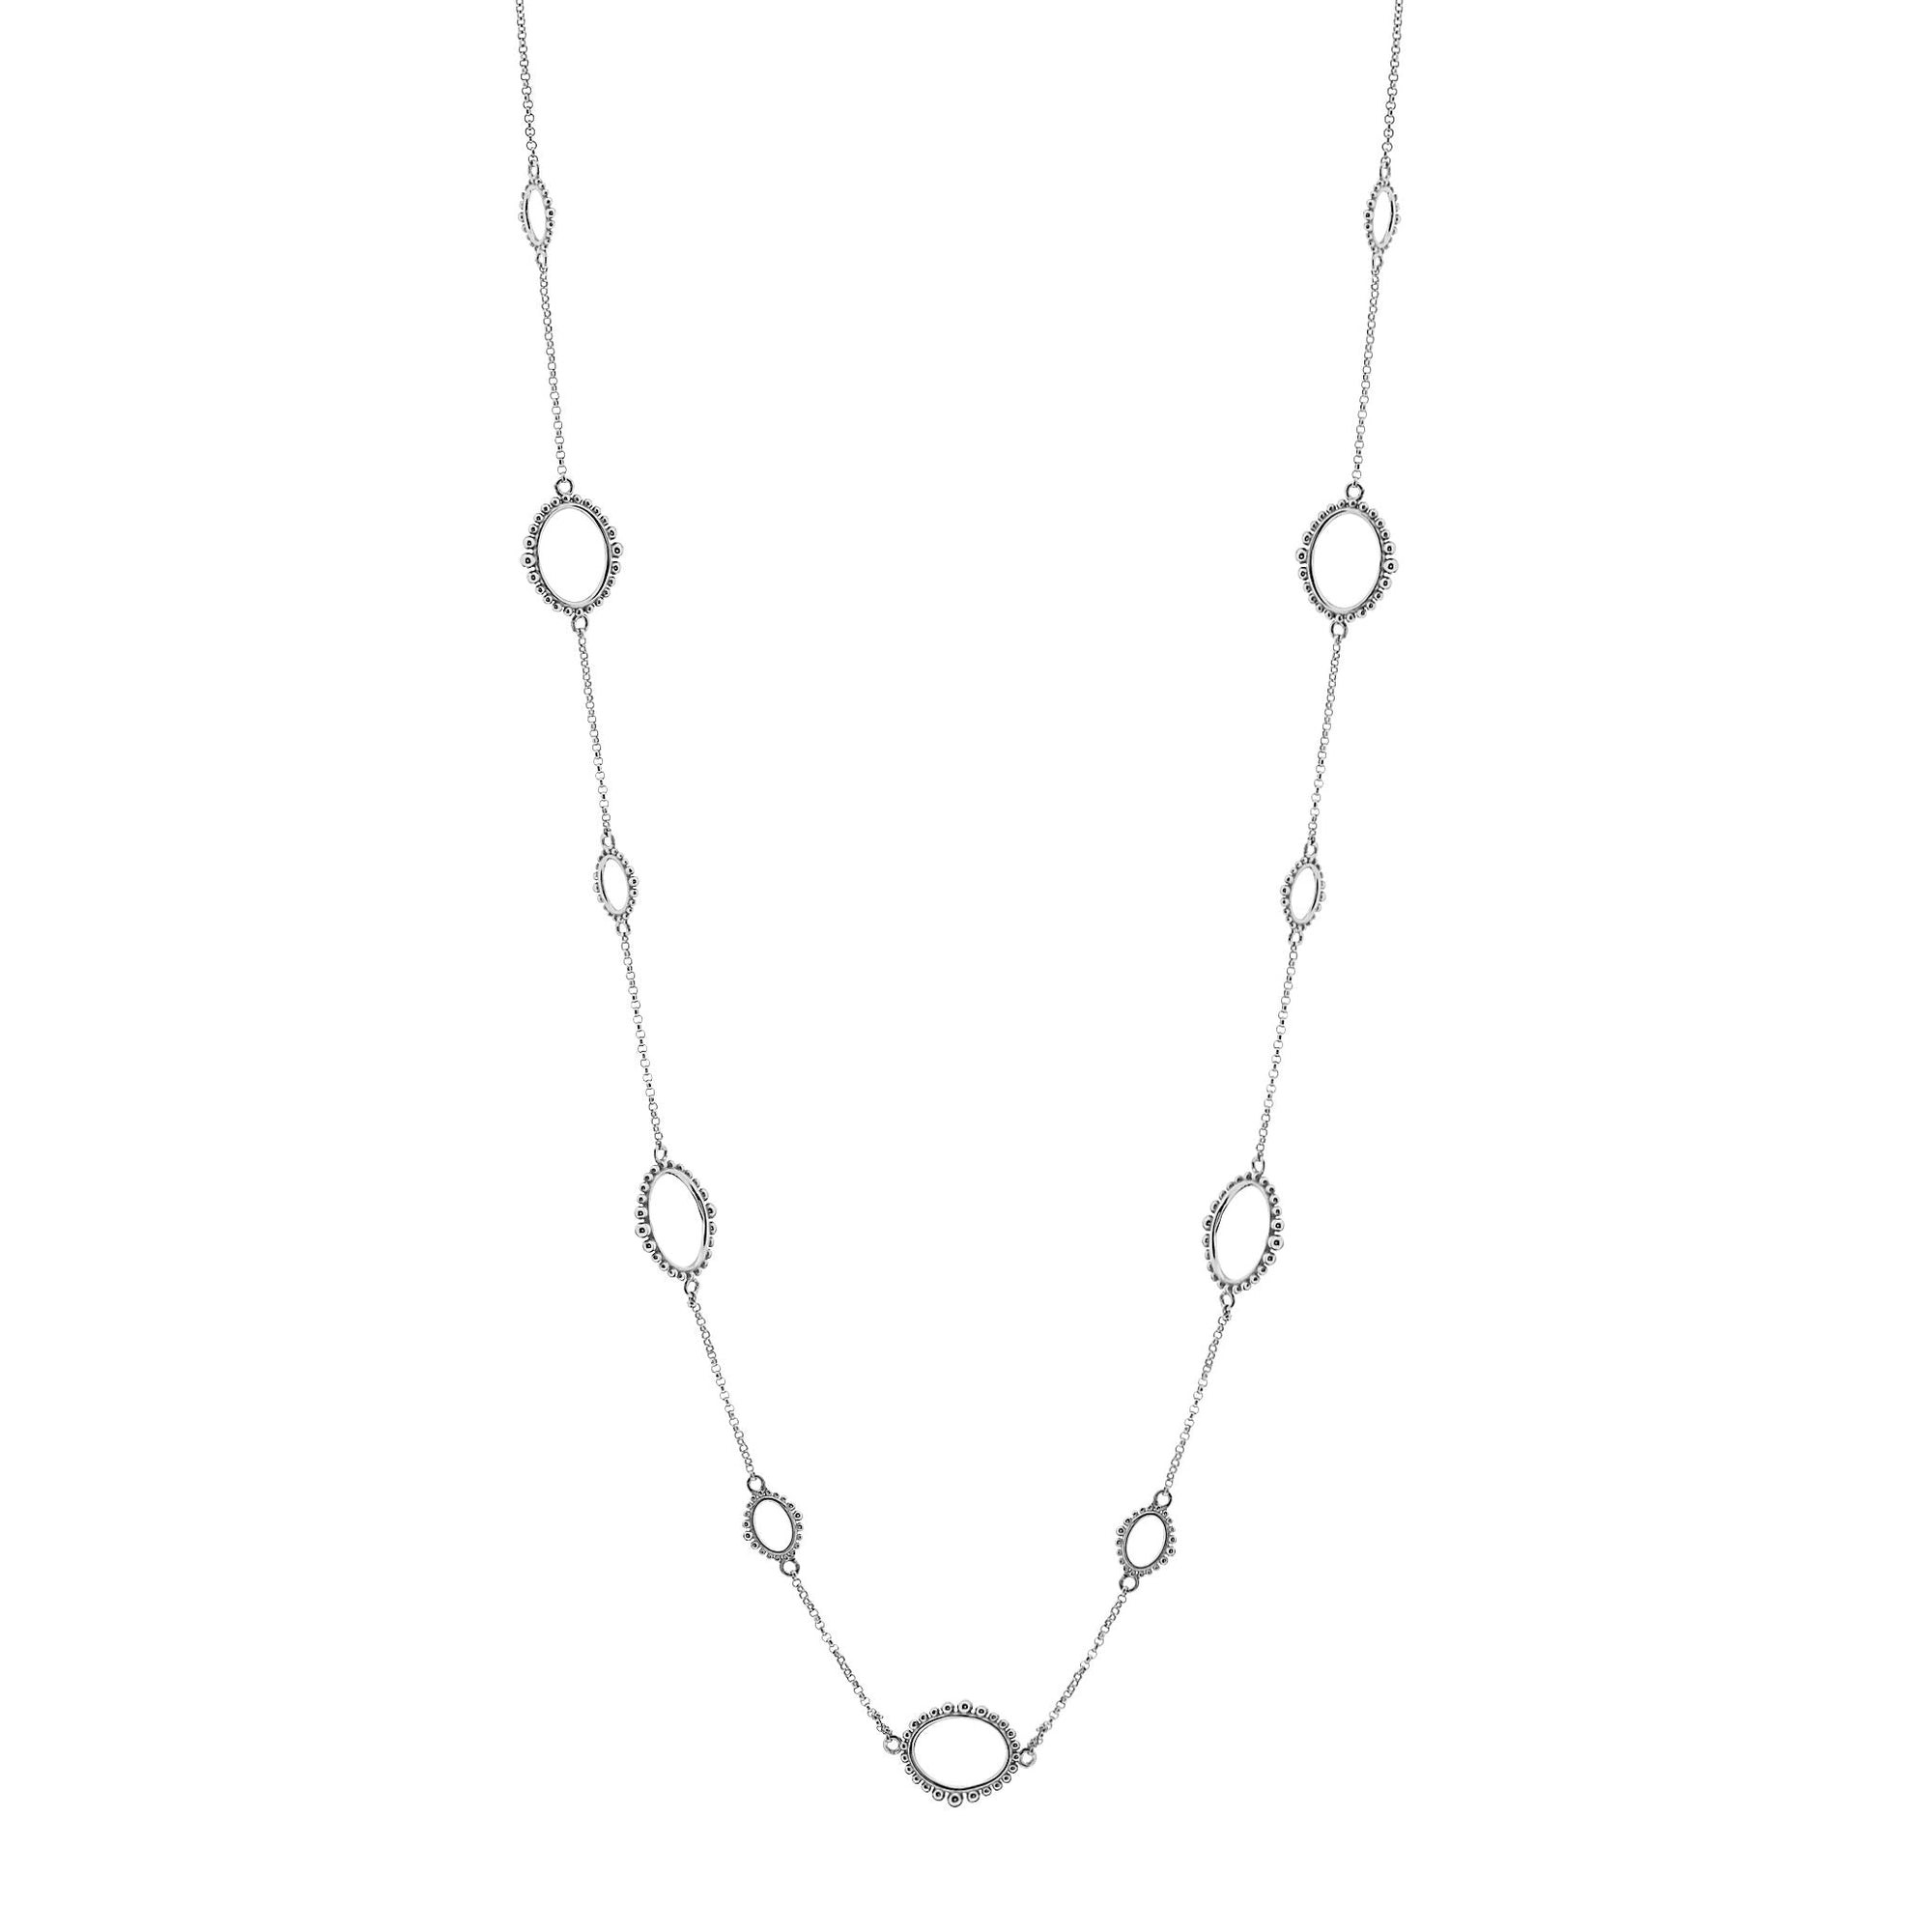 Sybella Necklaces Fiona Long Chain Necklace